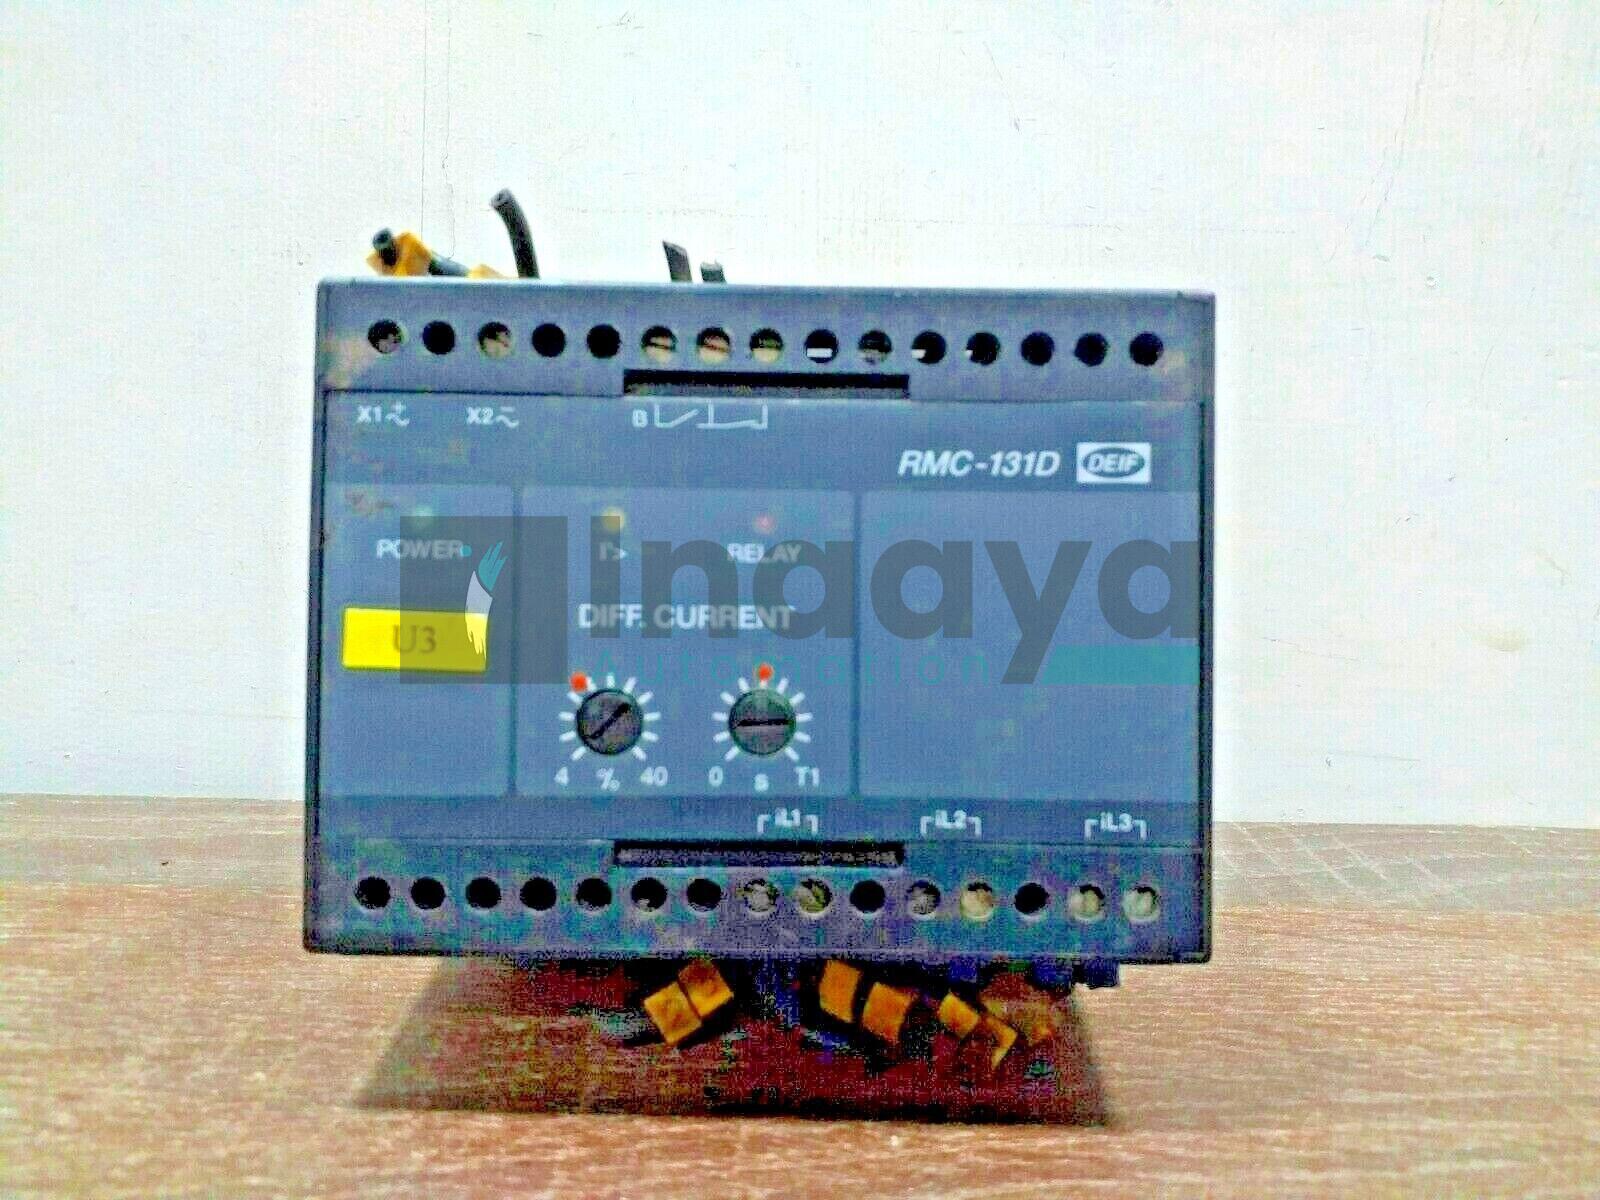 DEIF RMC-131D CURRENT RELAY